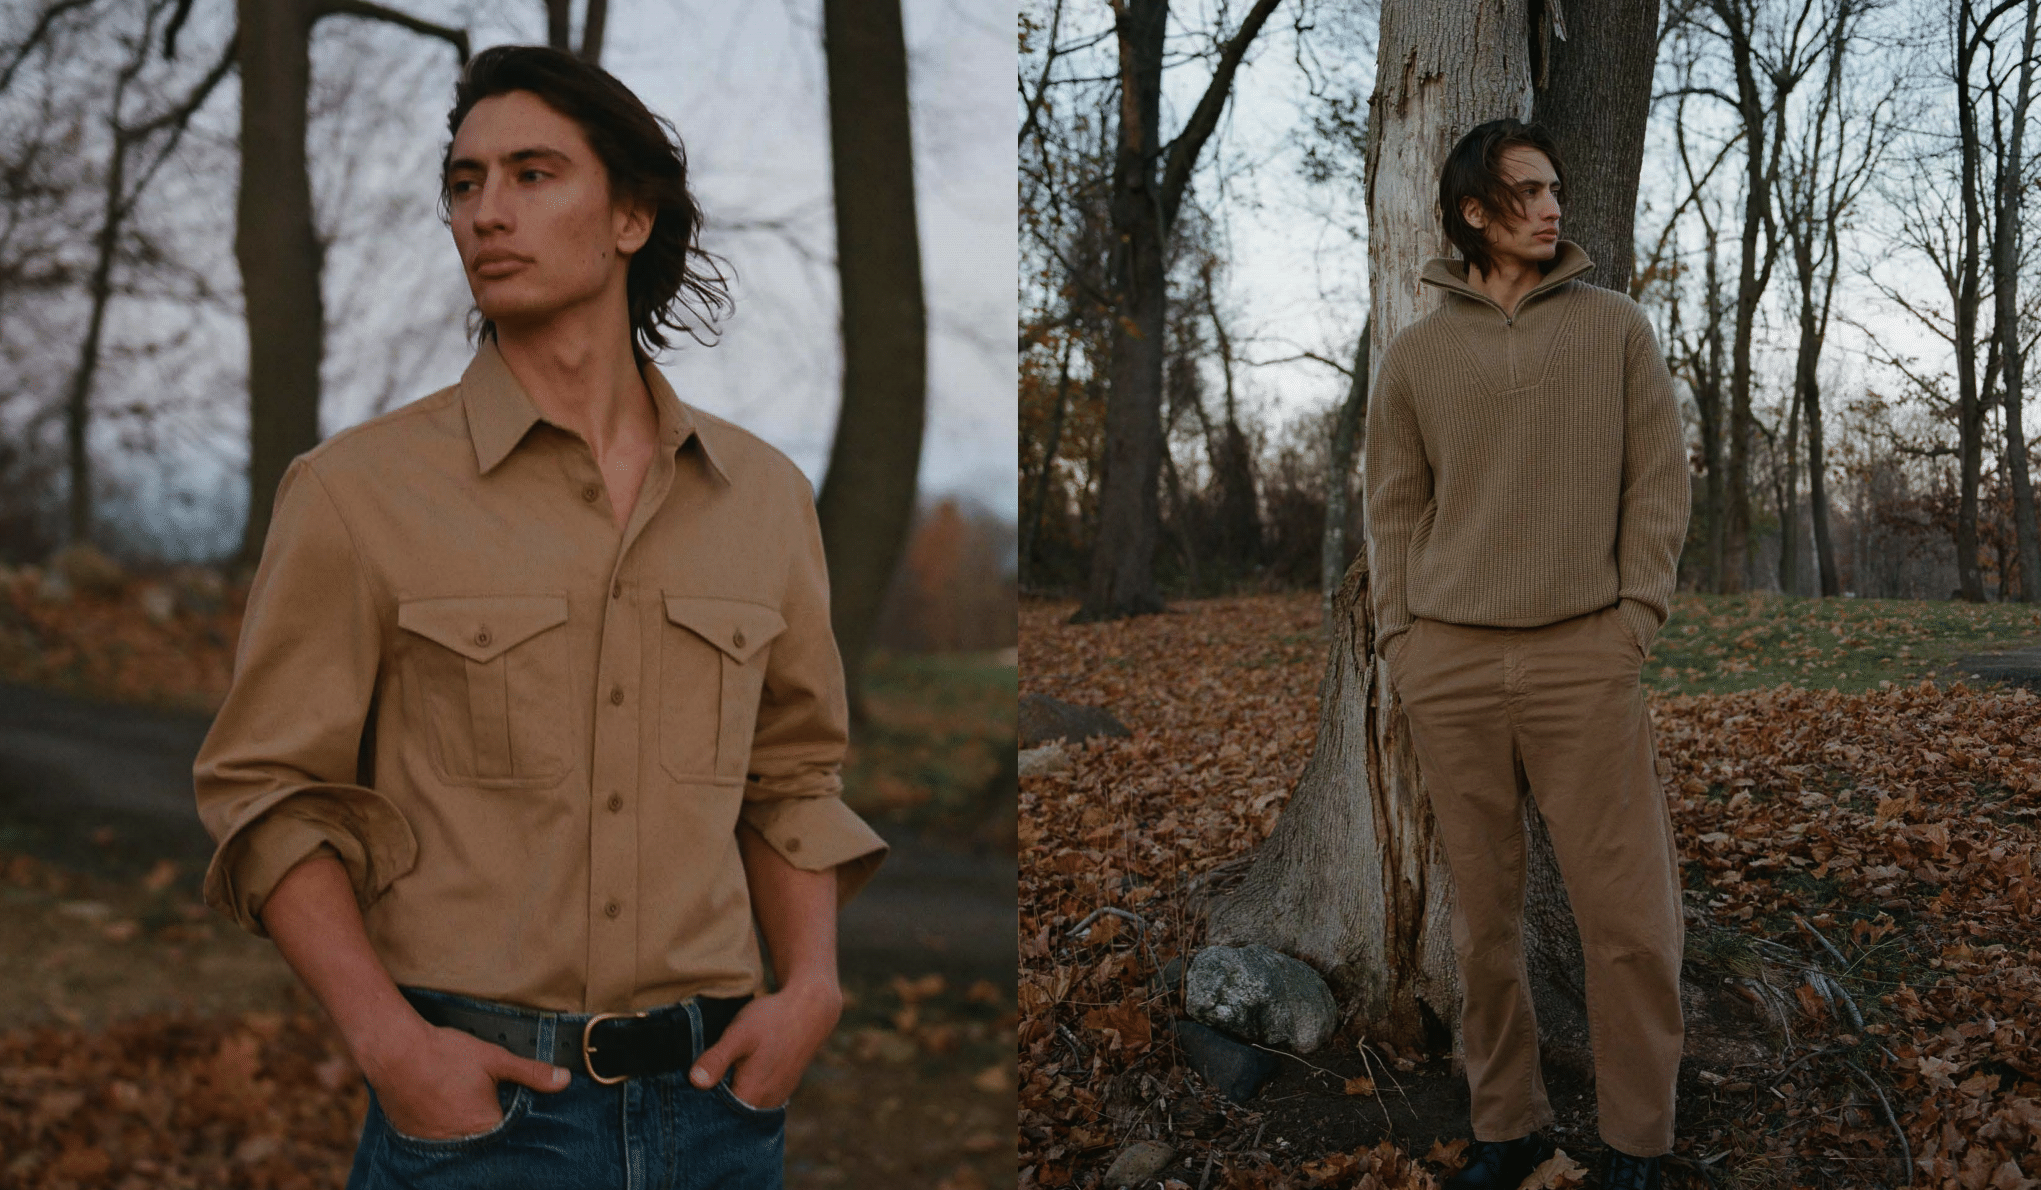 Nili Lotan launches first menswear collection